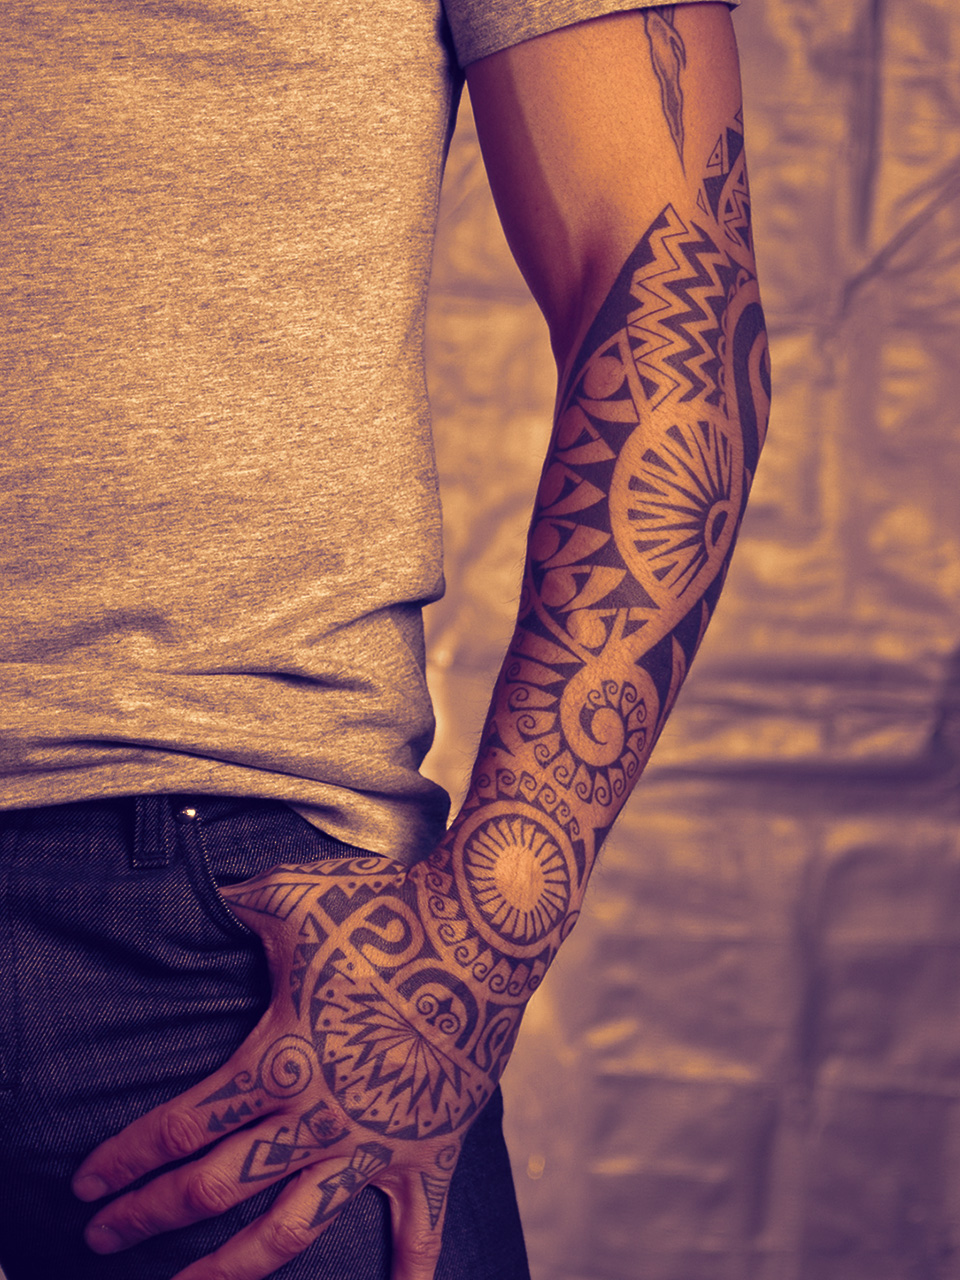 Henna Tattoo Designs For Men You can decorate different areas of your feet depending on your own look at how the beautiful henna tattoo designs wrap around this lady's hands and fingers! tattoos